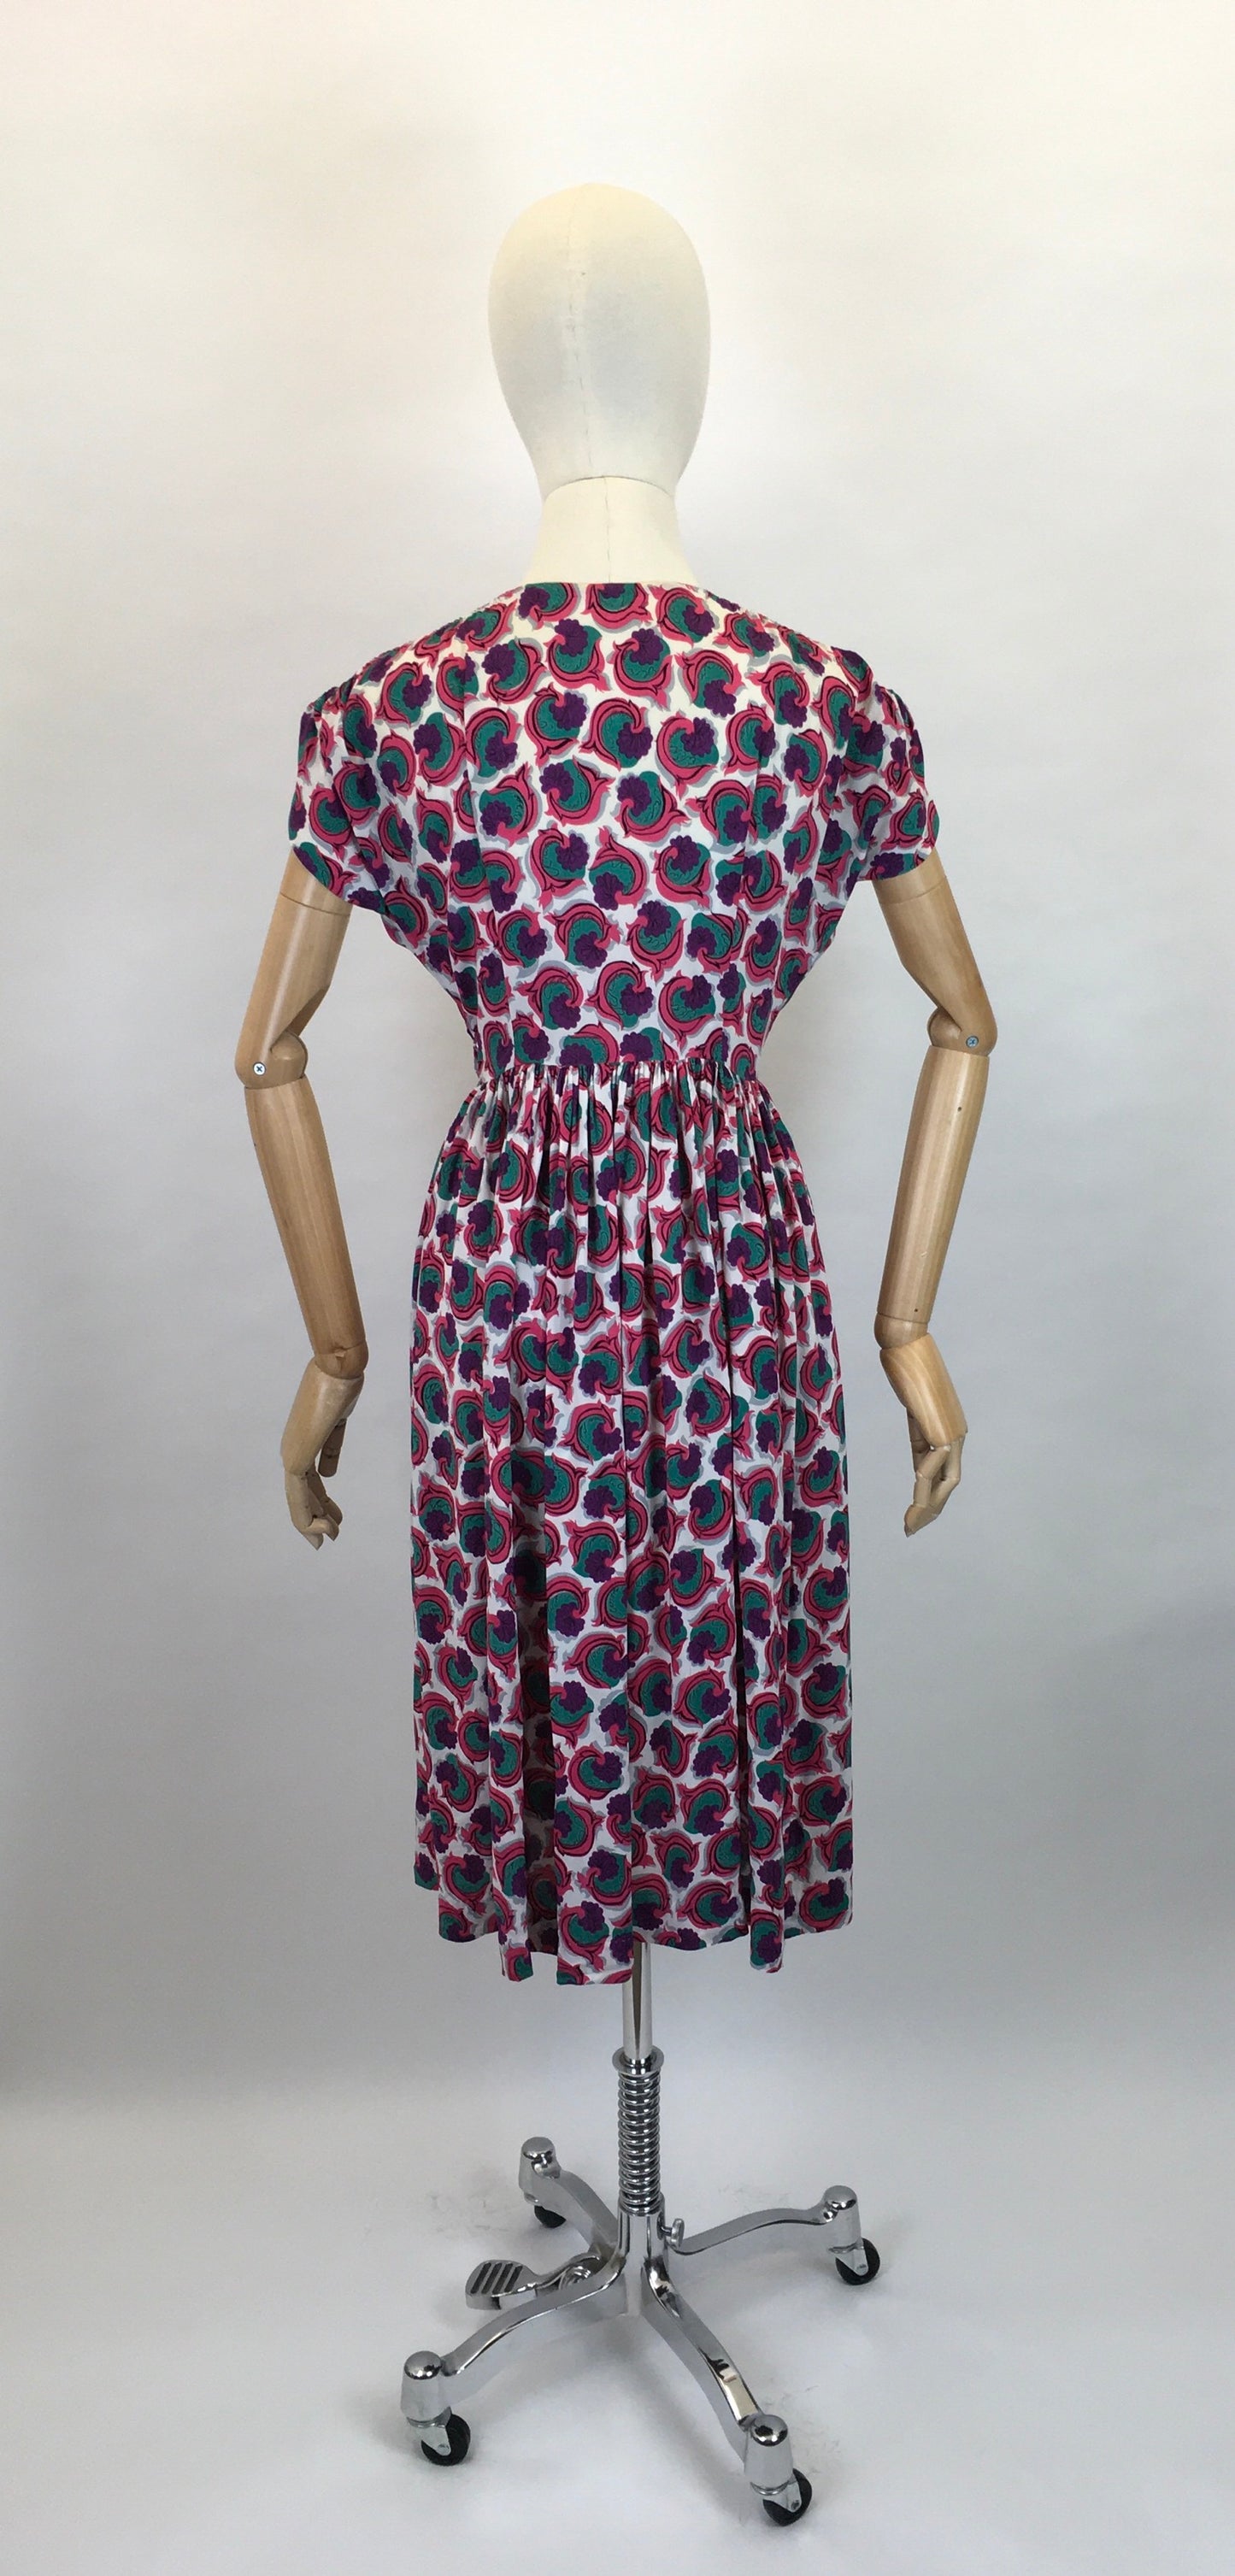 Original 1940s Crepe De Chine Dress - In a Beautiful Pallet of Rich Purples, Pinks and Jade Green